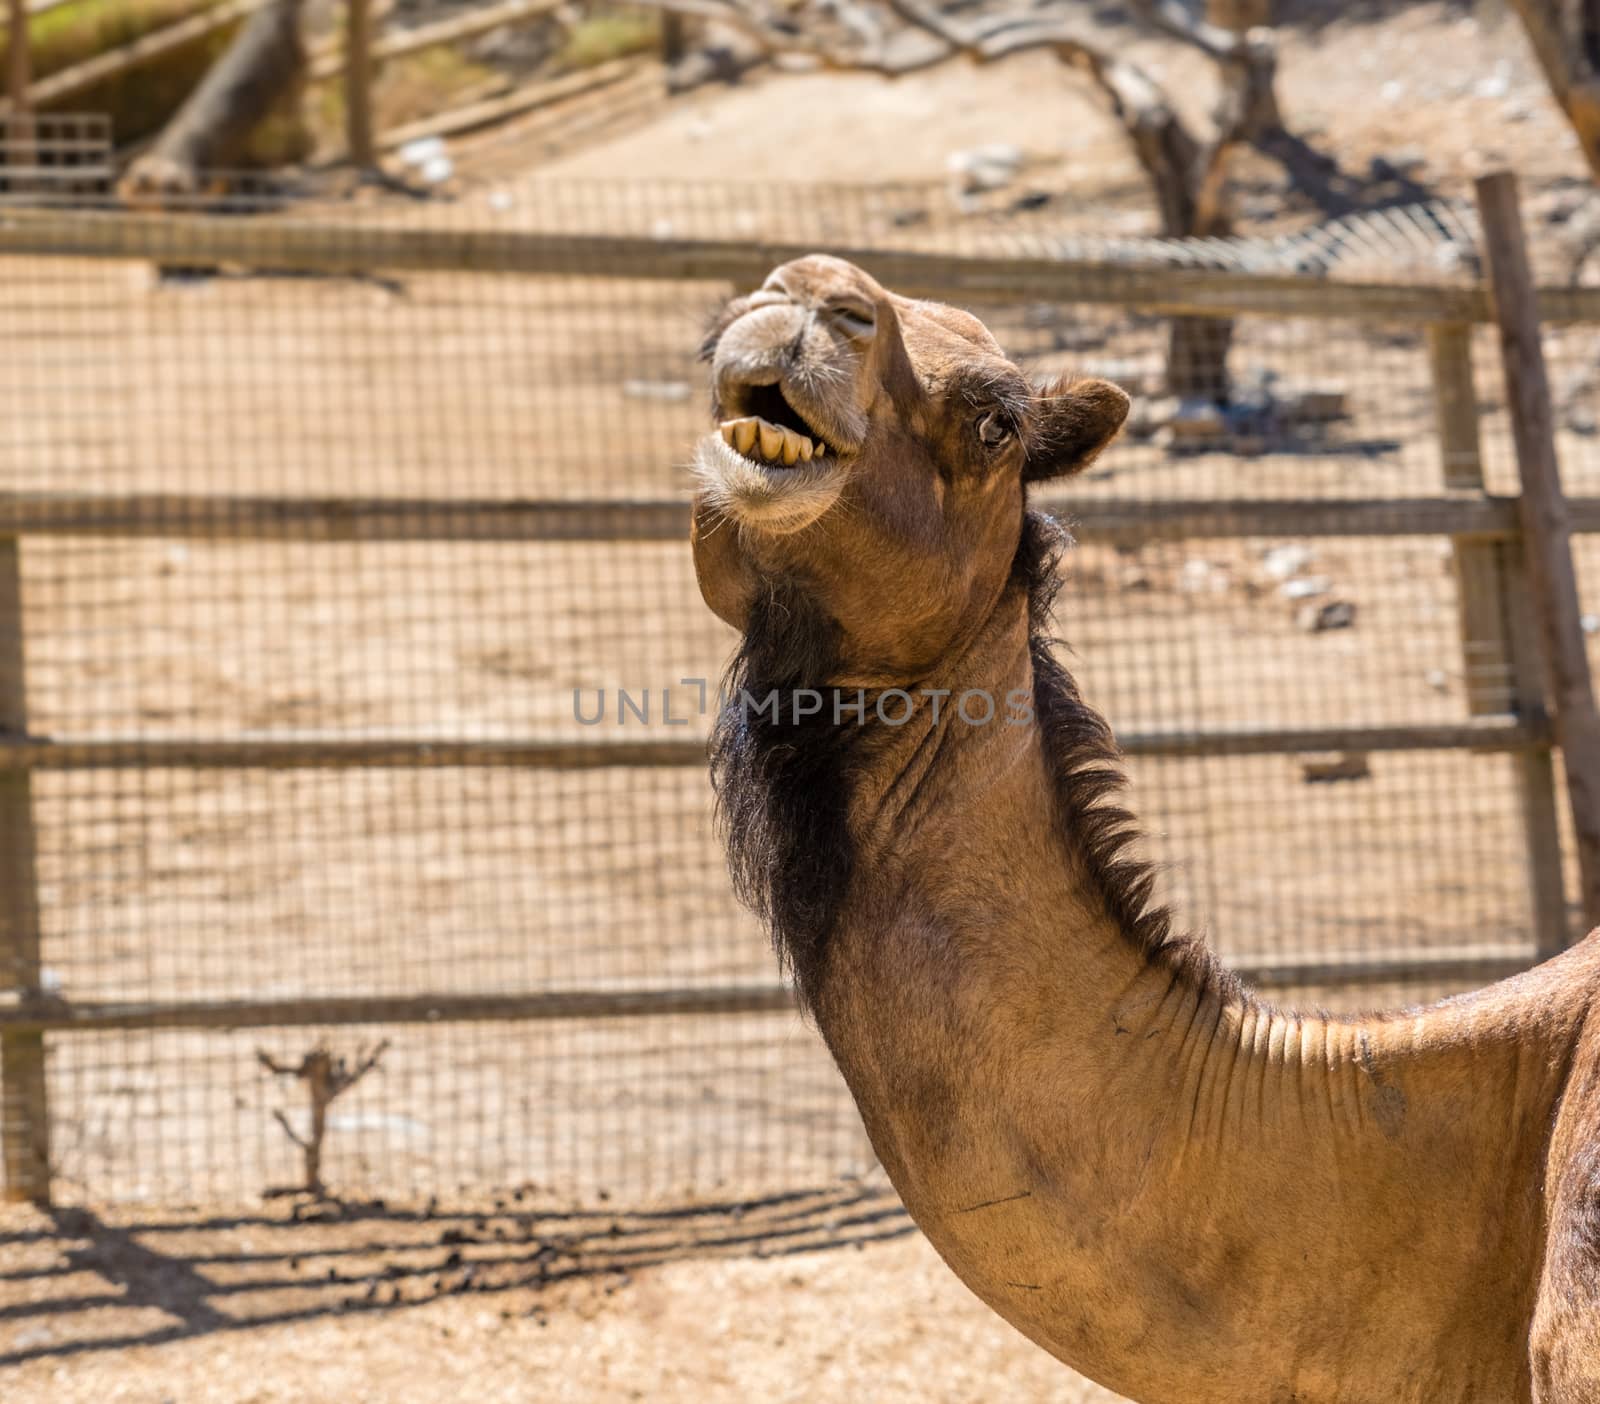 camels smiling by jcdiazhidalgo